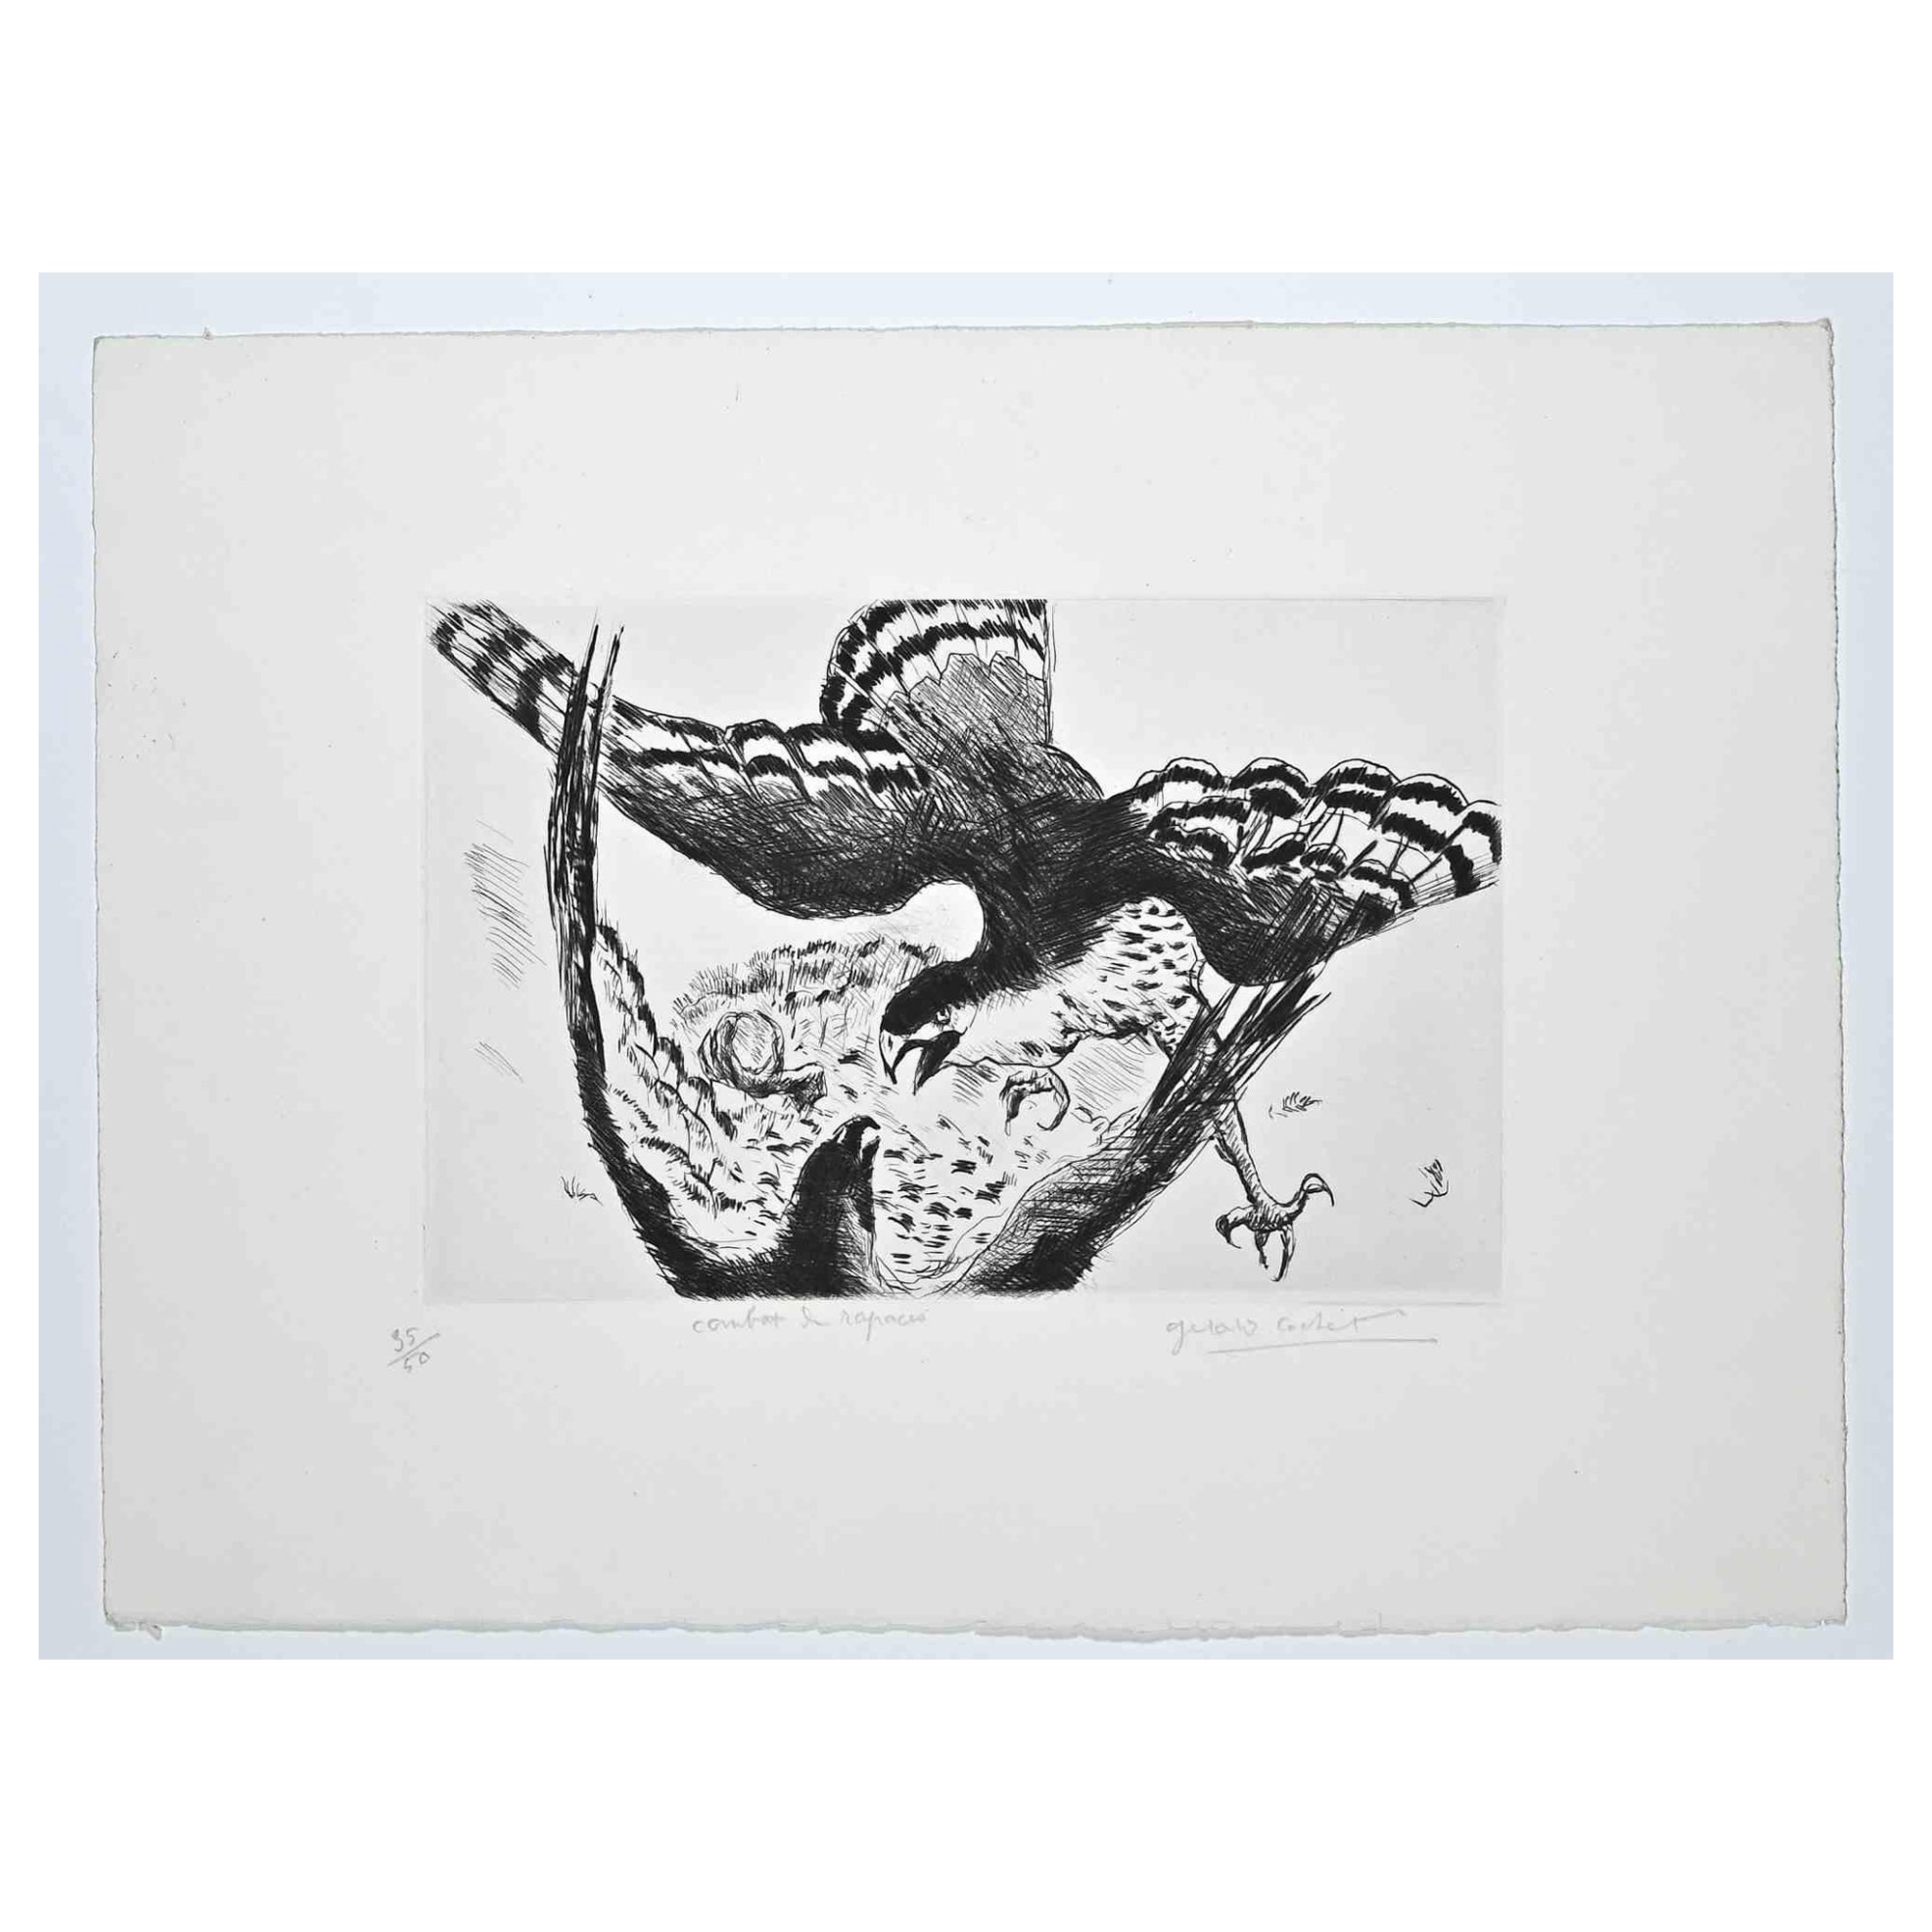 Fight is an original etching realized by Gérard Cochet in the Early 20th Century.

Good conditions.

Hand-signed.

Numbered. Edition,35/50.

The artwork is depicted through soft strokes in a well-balanced composition.